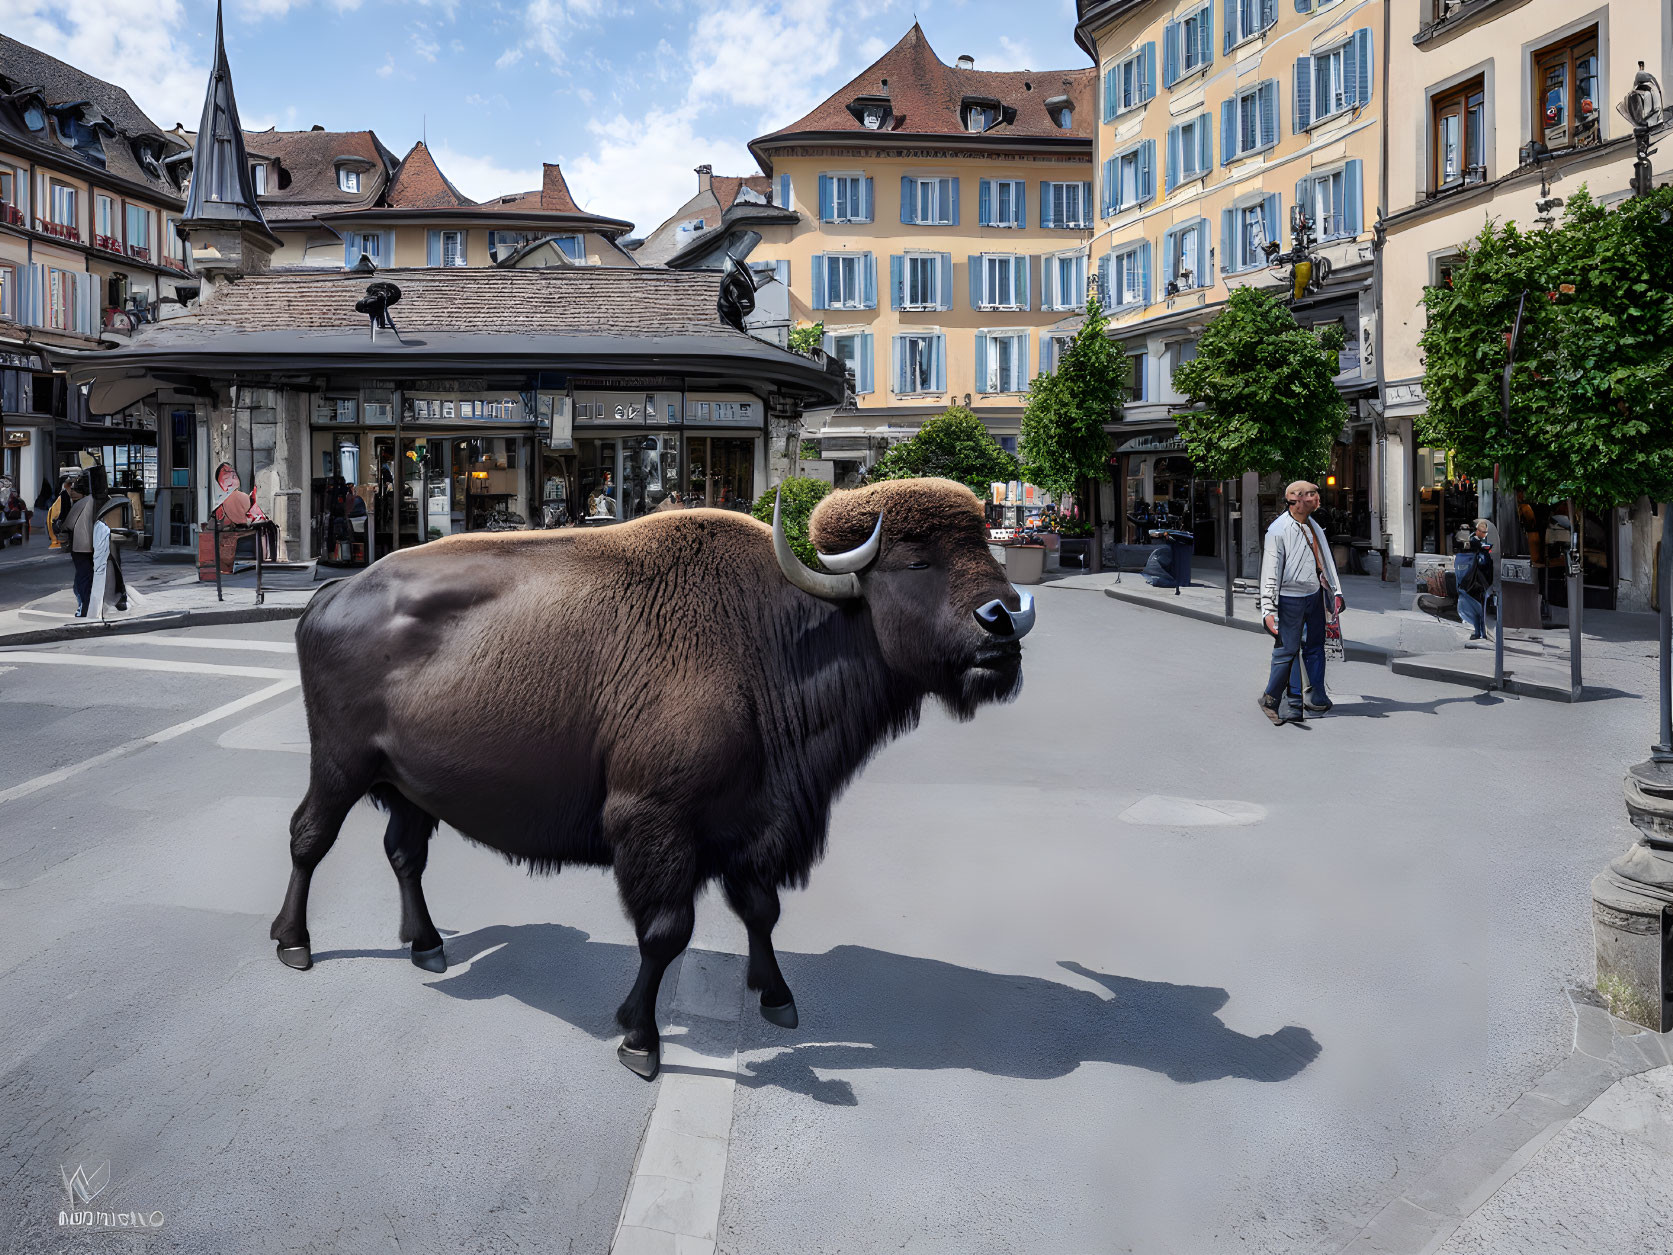 A buffalo in the city of Neuchâtel